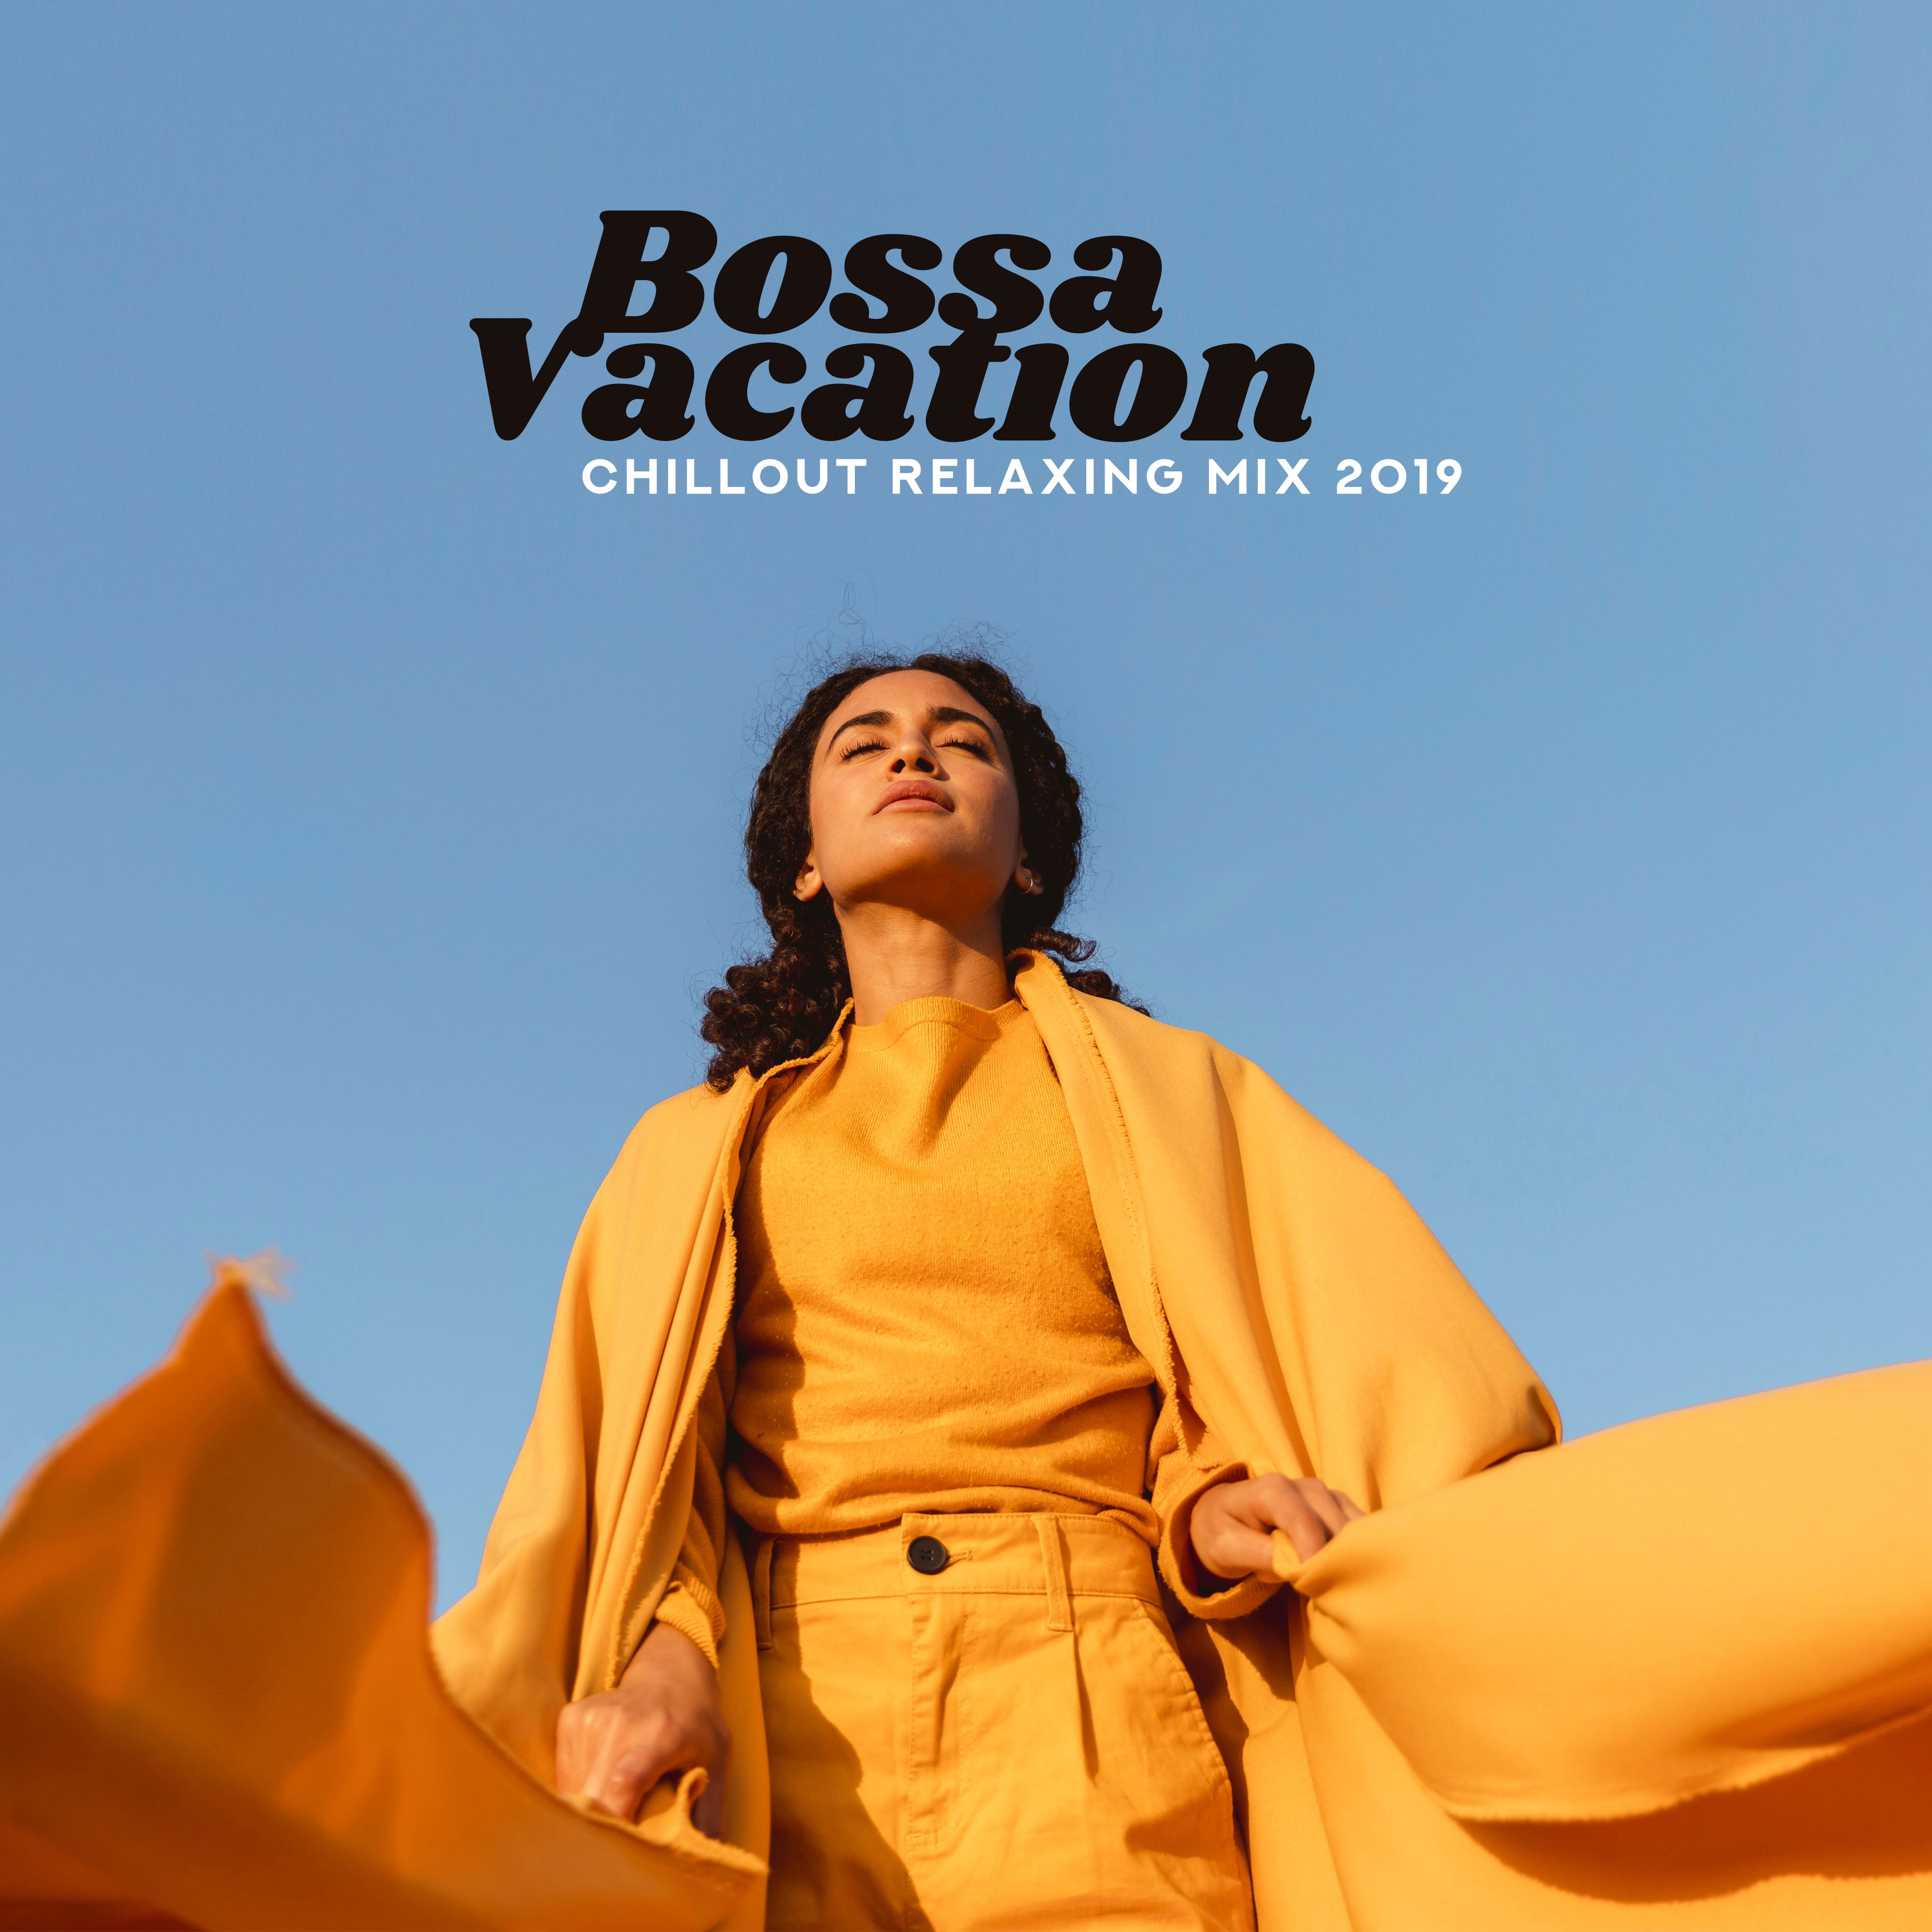 Bossa Vacation Chillout Relaxing Mix 2019  Collection of Best Chill Out Music for Relaxation, Celebration of Summer Vacation Free Time, Moments of Pure Calm Down, Rest  Relax on the Beach